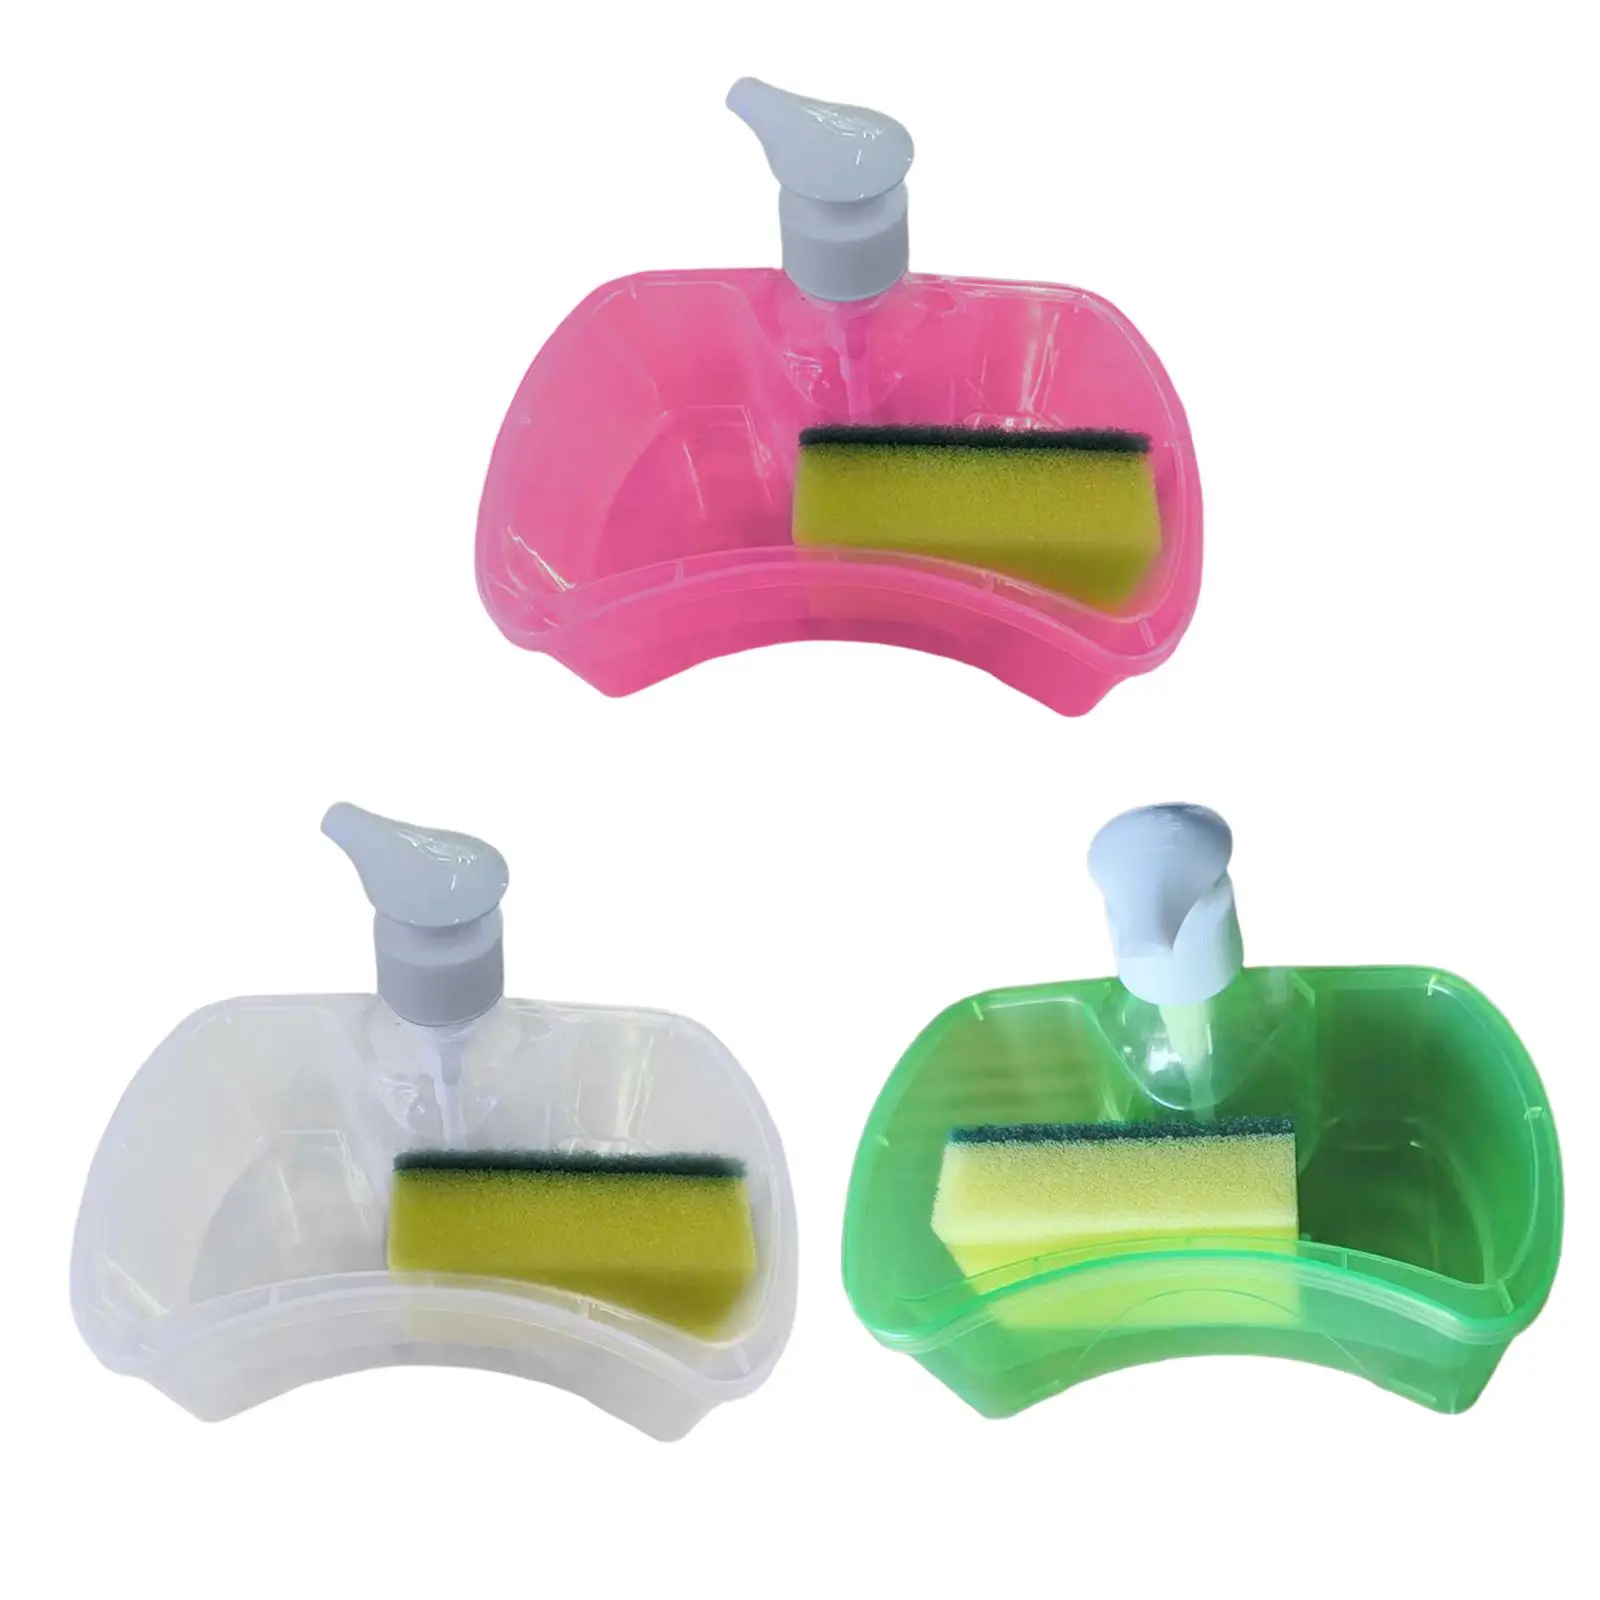 Soap Dispenser And Scrubber Holder Sink Dish Washing Soap Holder Cleaning Liquid